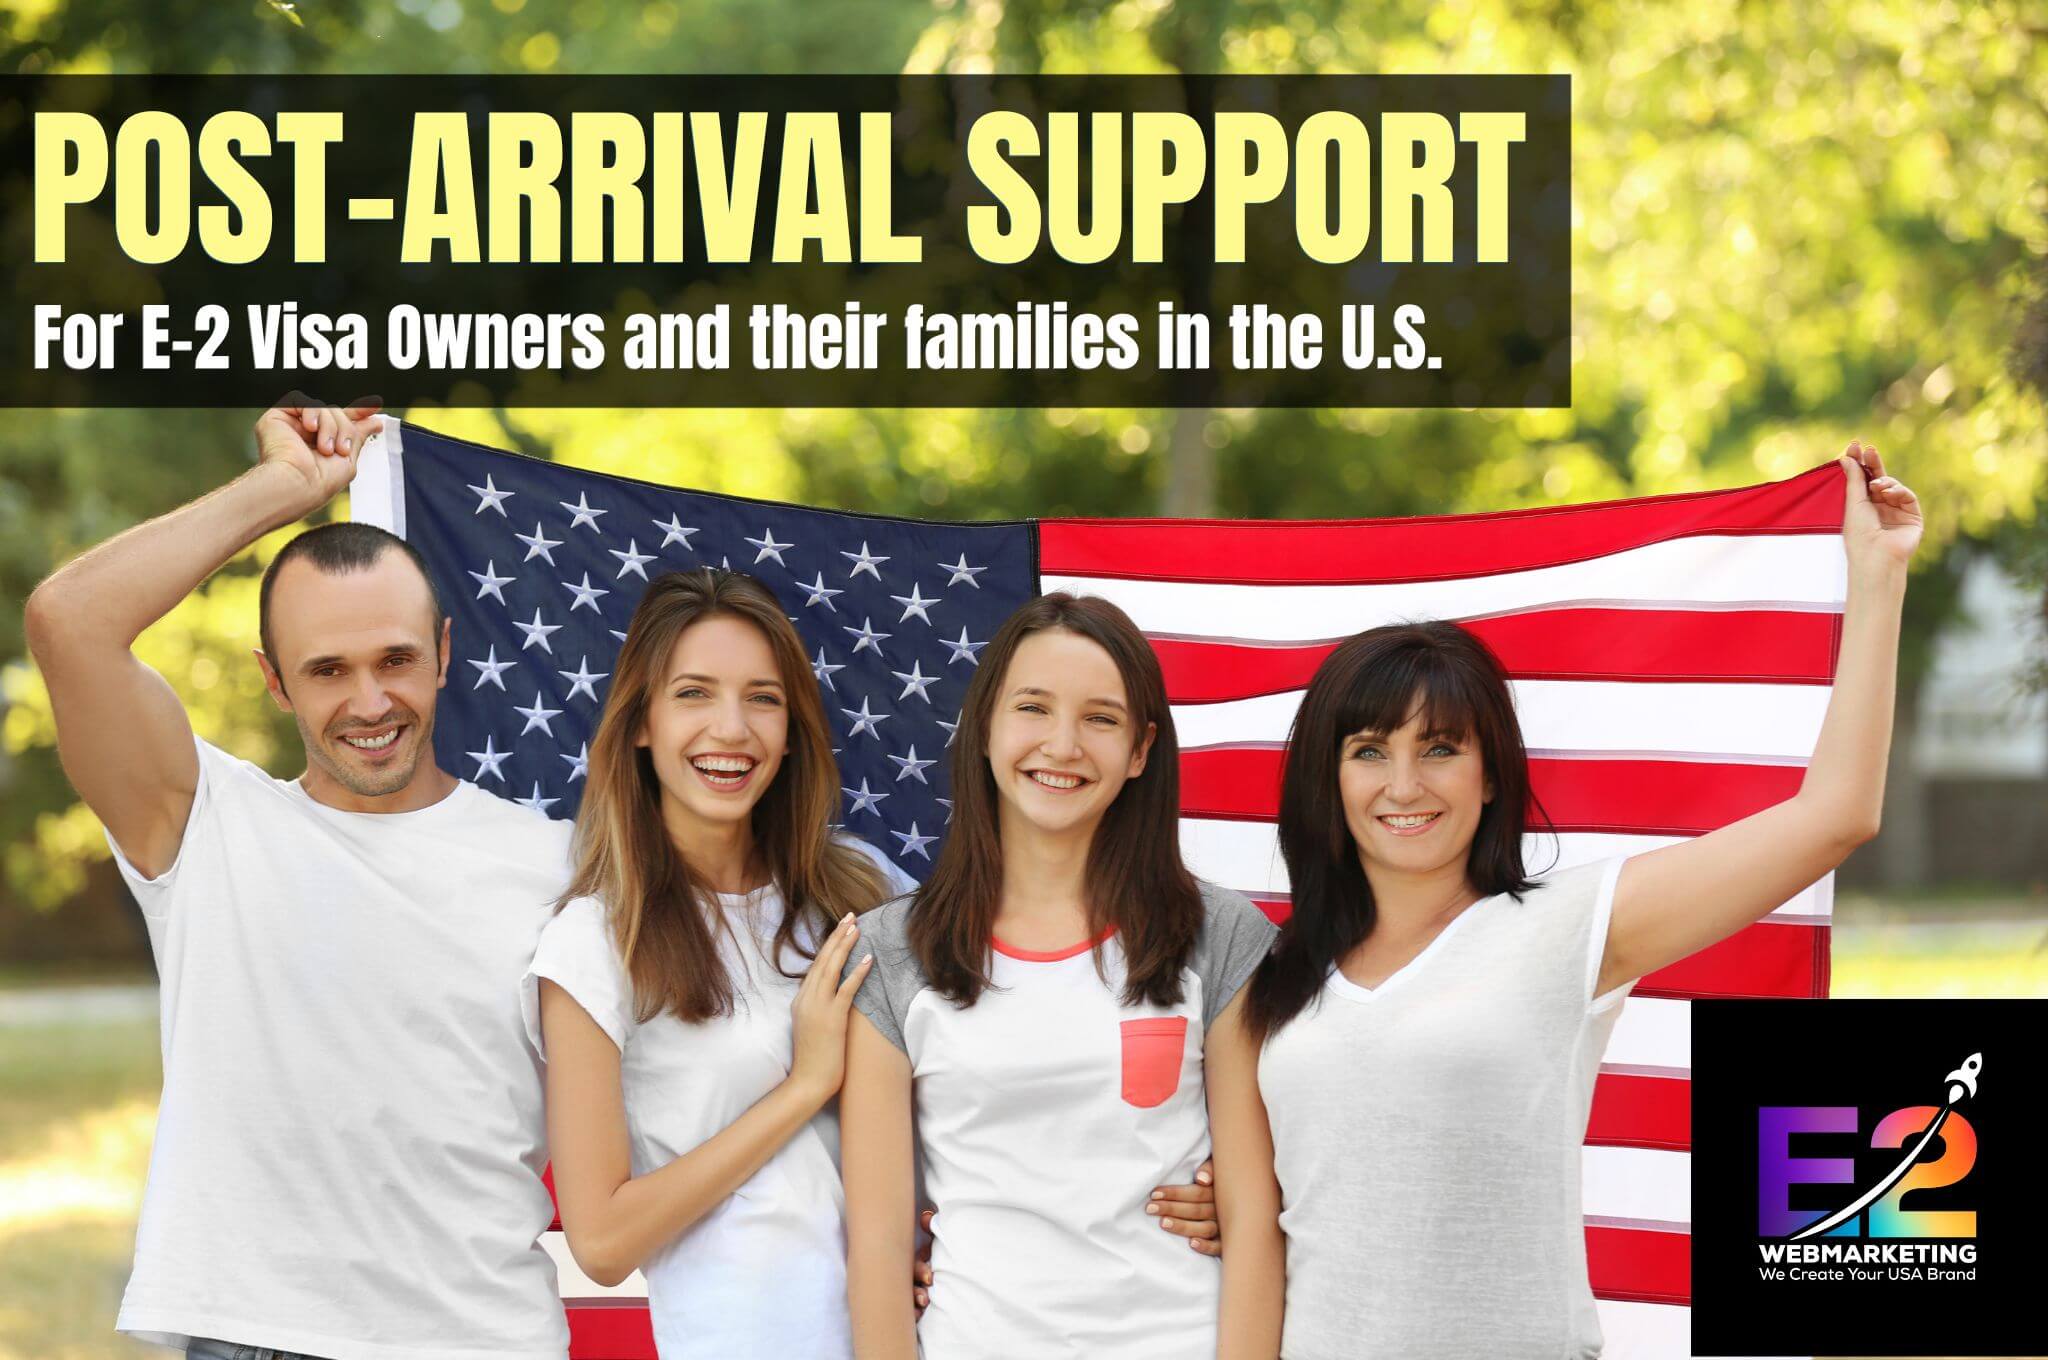 E-2 Visa Support for owners and families in the U.S.